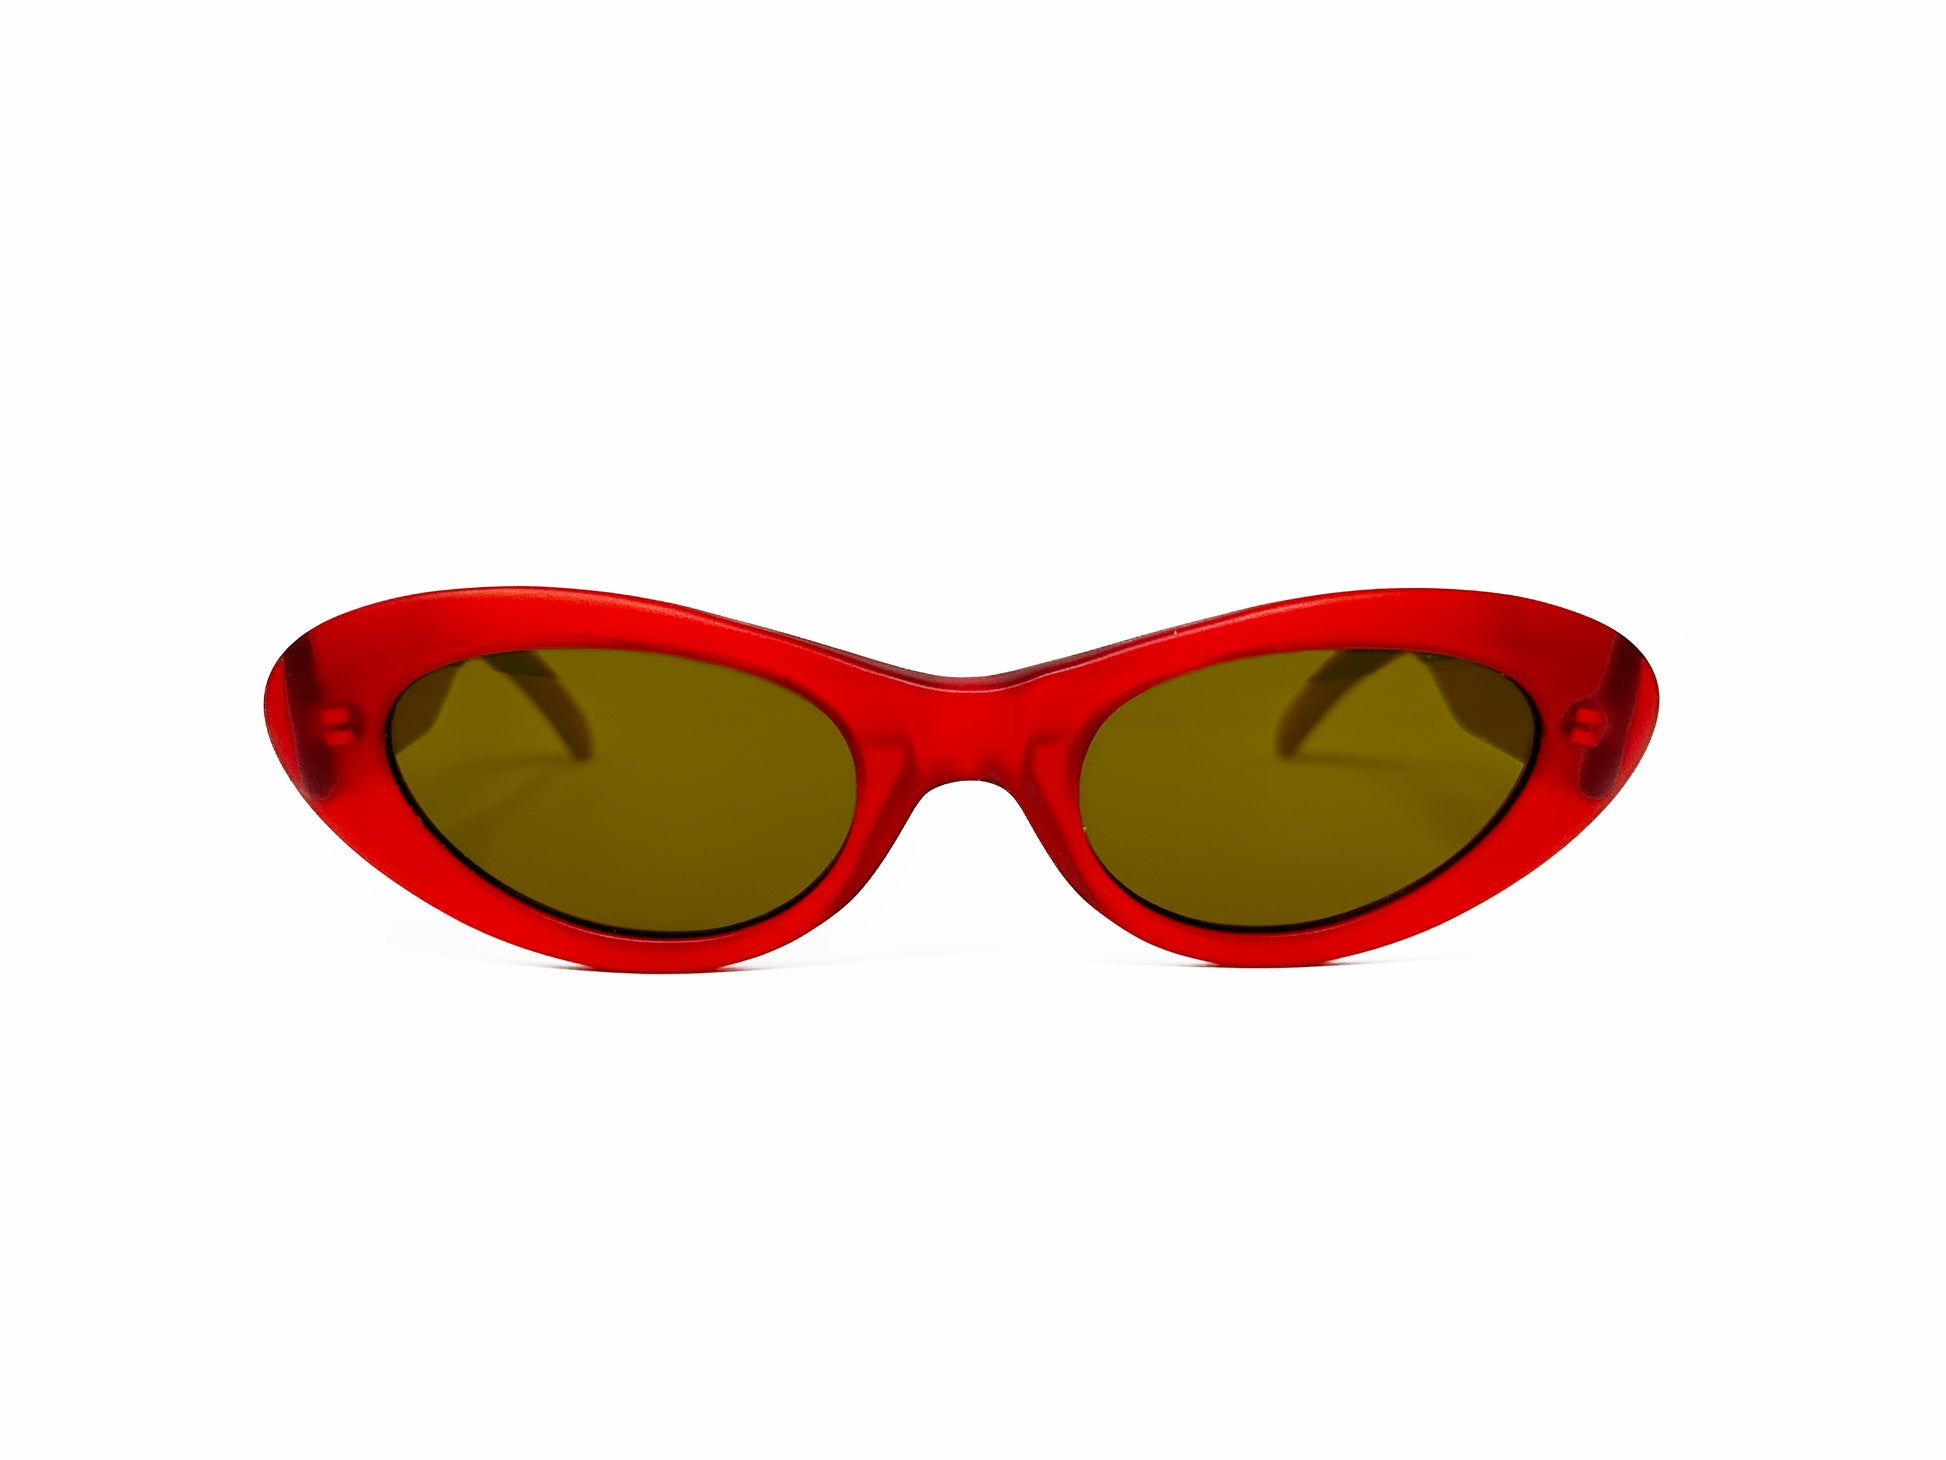 Kador oval, cat-eye, acetate sunglasses. Model: 3. Color: 1453- Red with green lenses. Front view. 